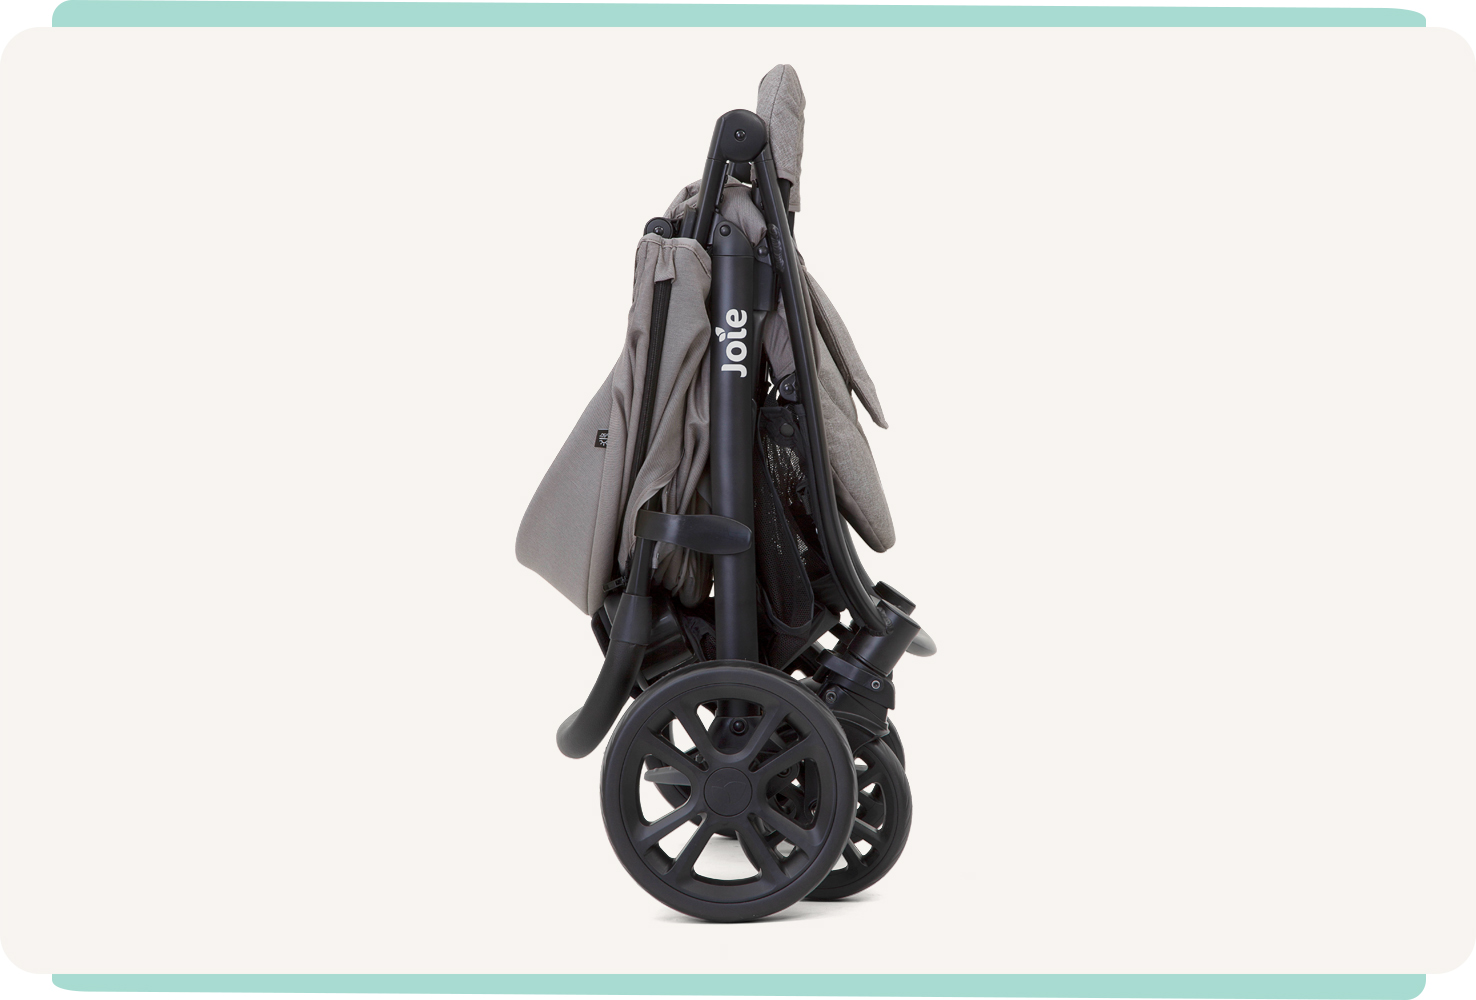 Joie litetrax 4 stroller folded at angle